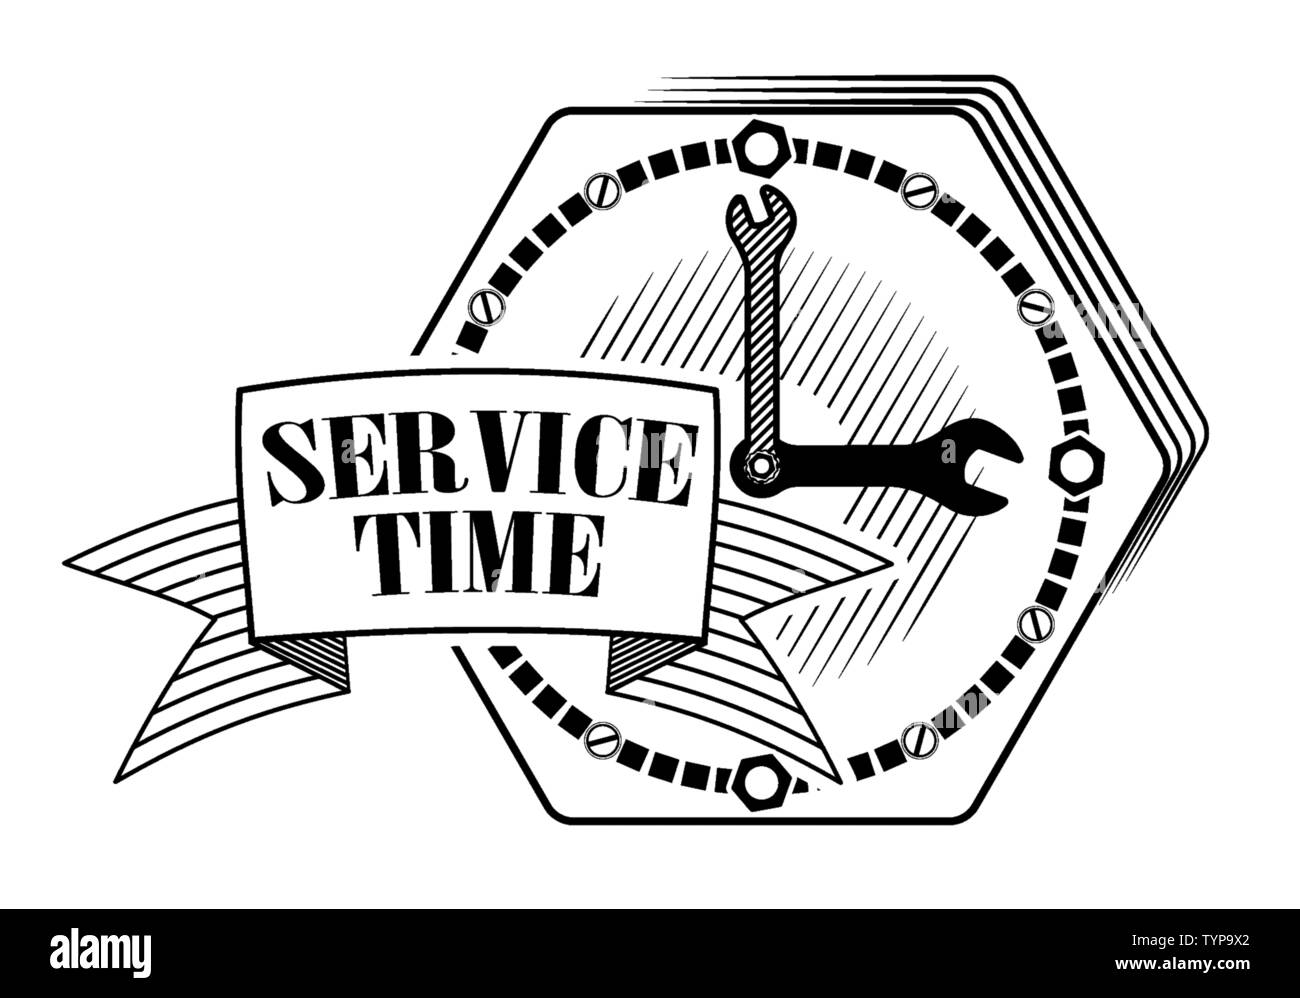 Emblem or logo for car service or repair of cars. Clock with wrenches. Place for text. Technical support or service site. Stock Vector